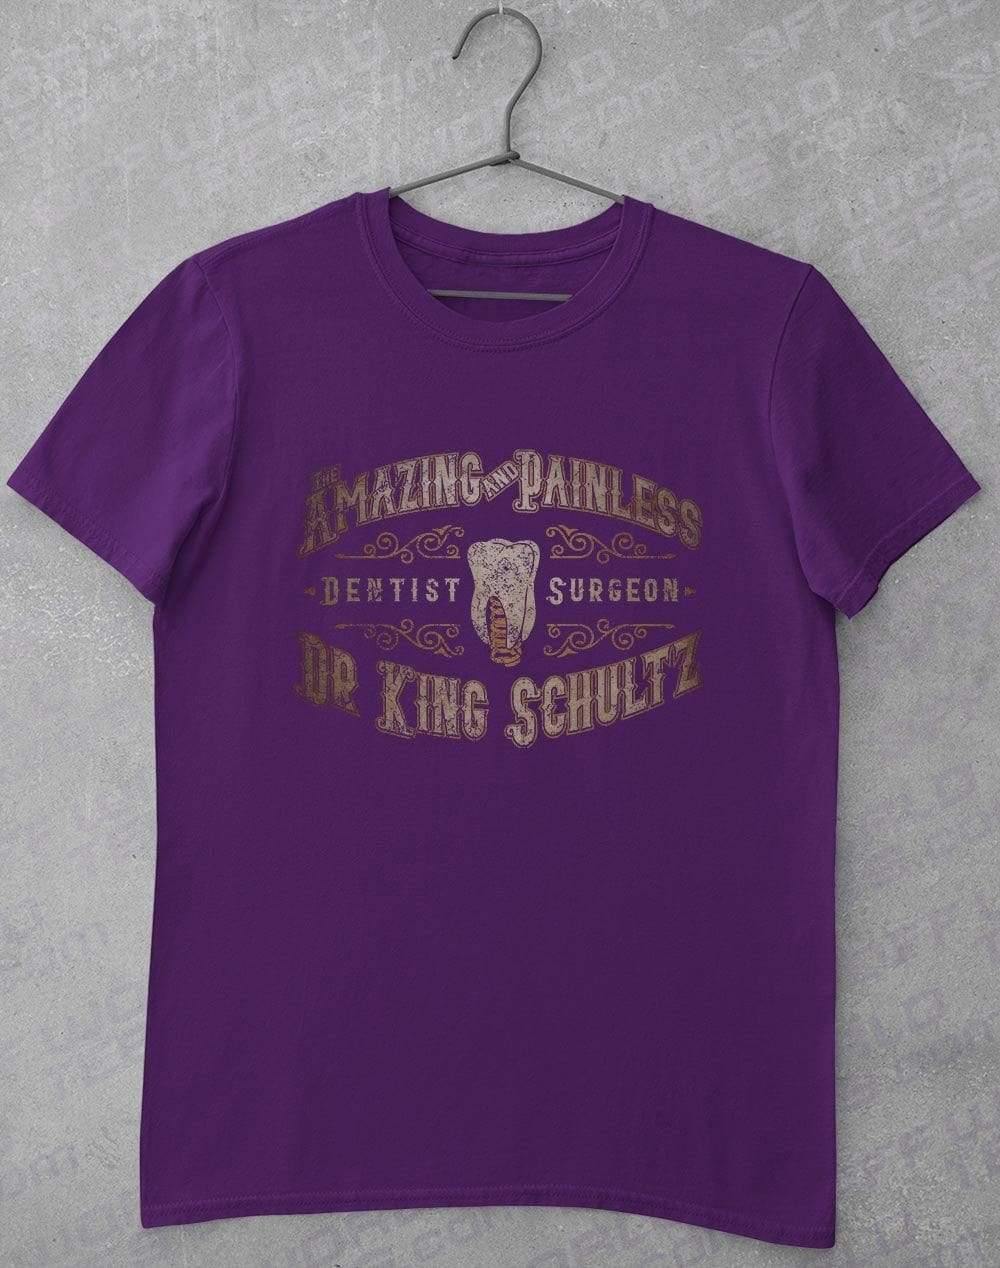 Dr. King Schultz Dentistry T Shirt S / Purple  - Off World Tees